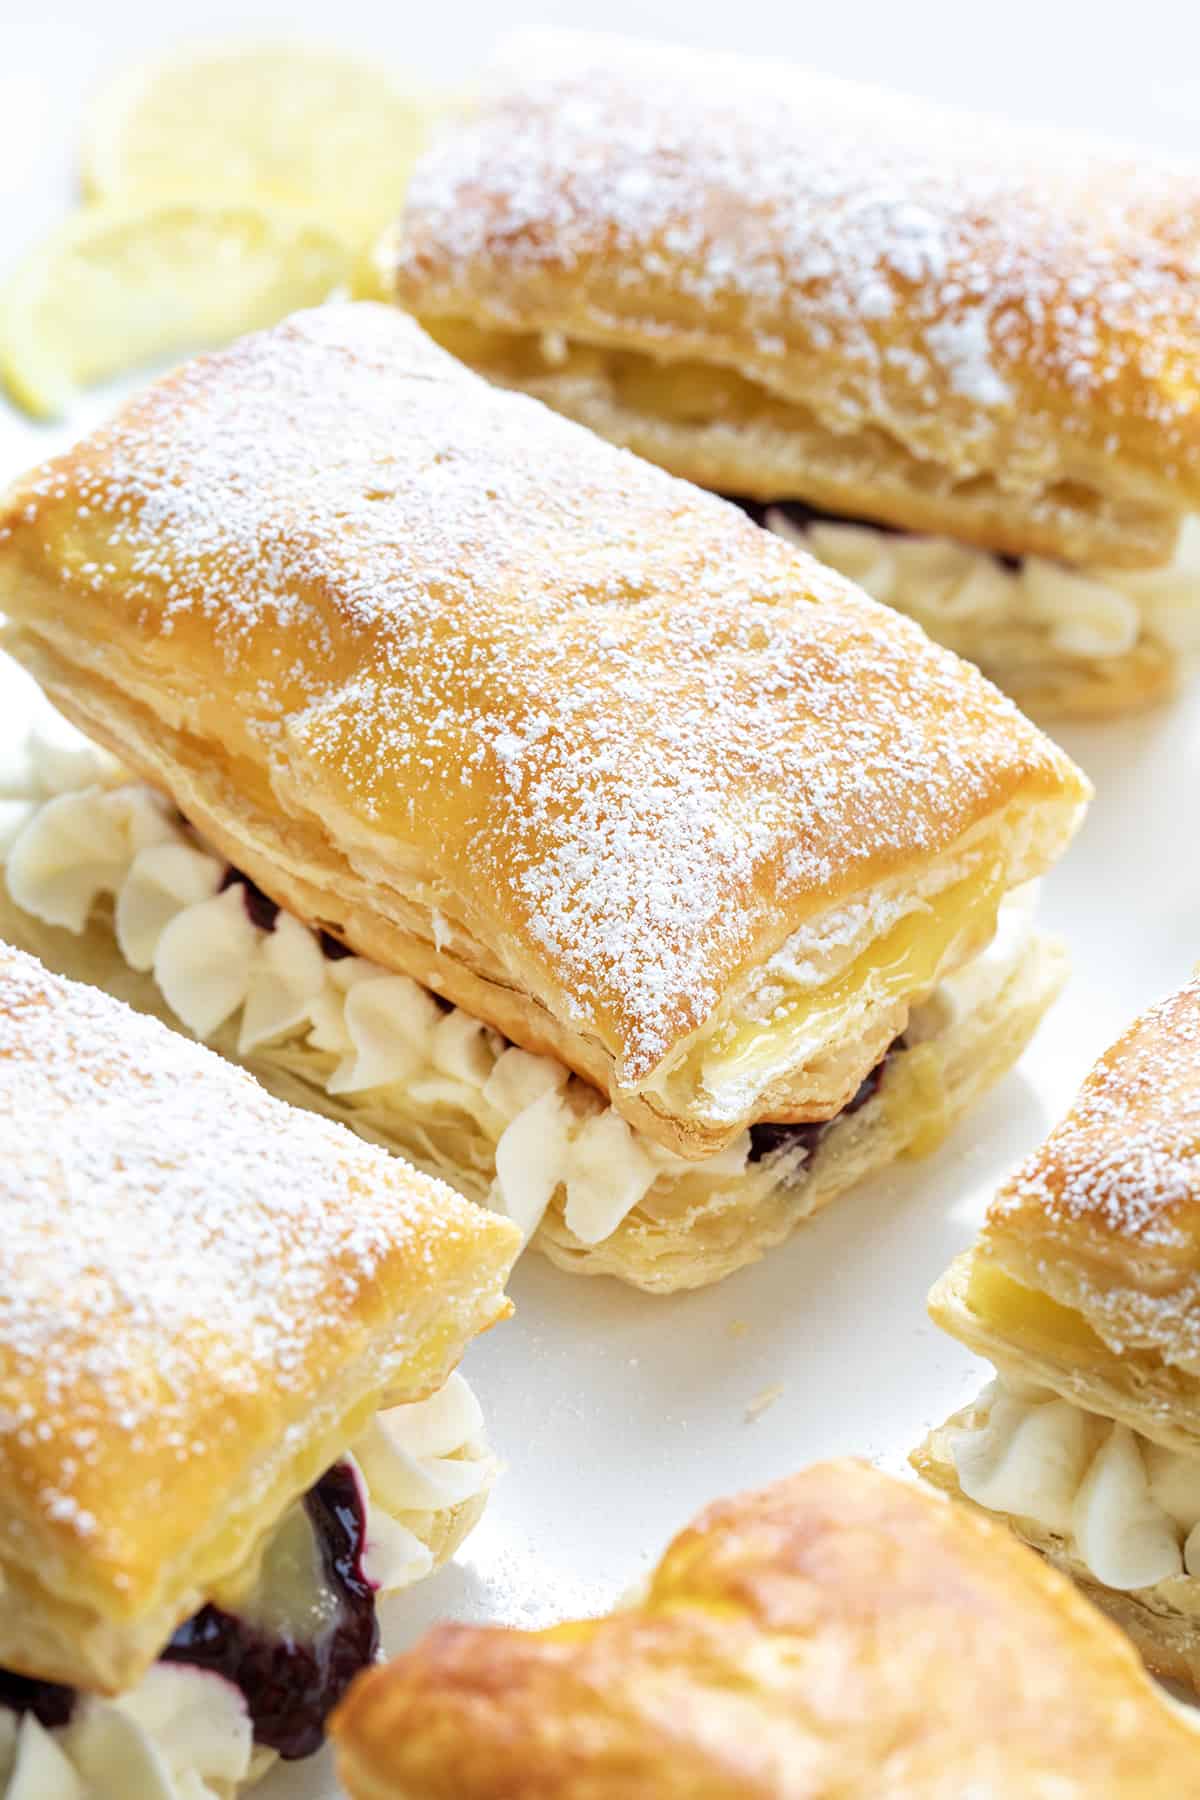 Close up of the Tops of Blueberry Lemon Napoleons Focusing on the Dusting of Powdered Sugar.